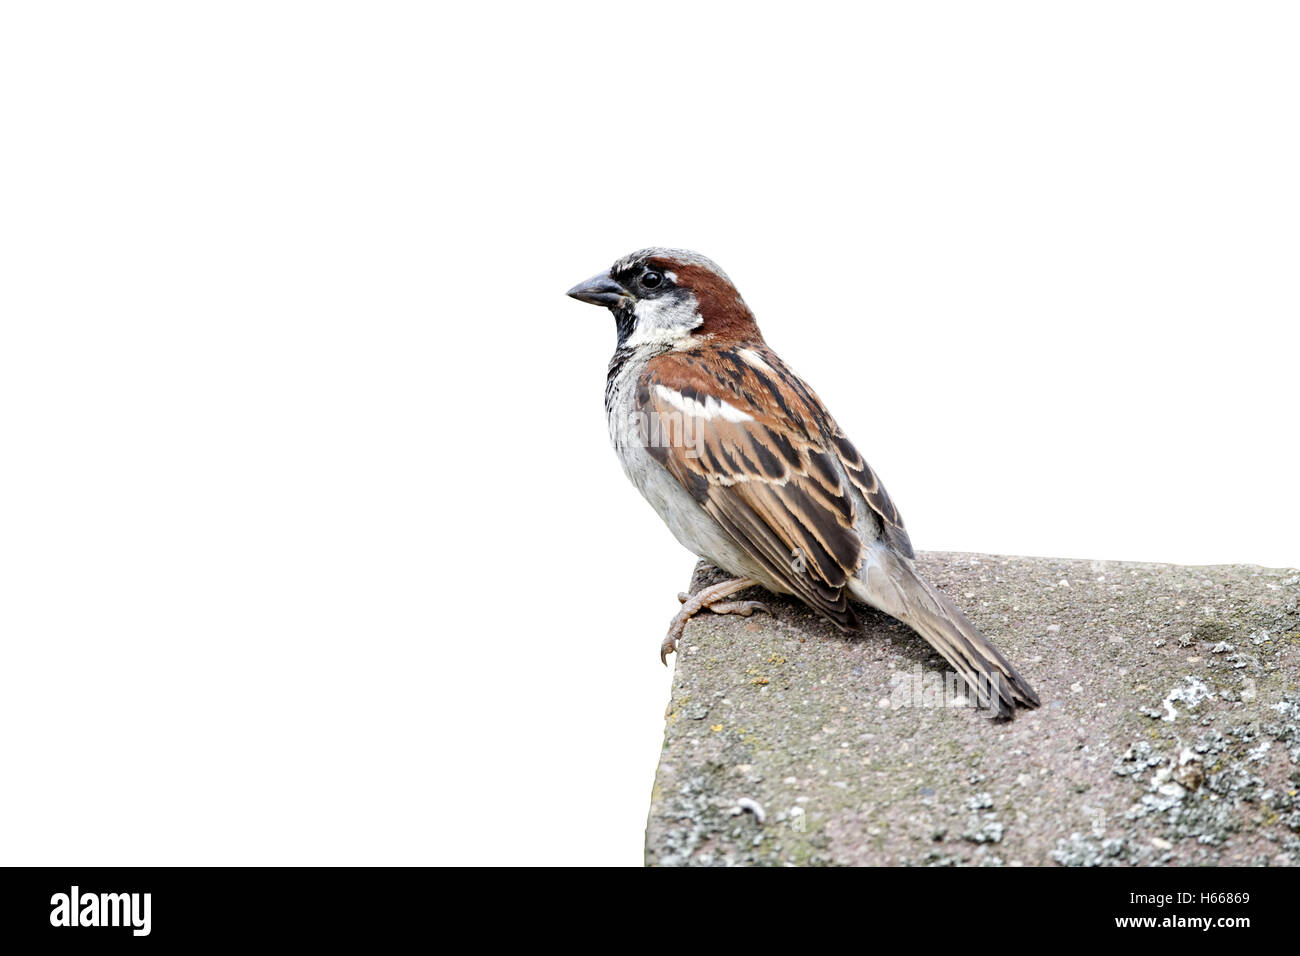 House sparrow, Passer domesticus. single male on tiled roof, Staffordshire, August 2012 Stock Photo